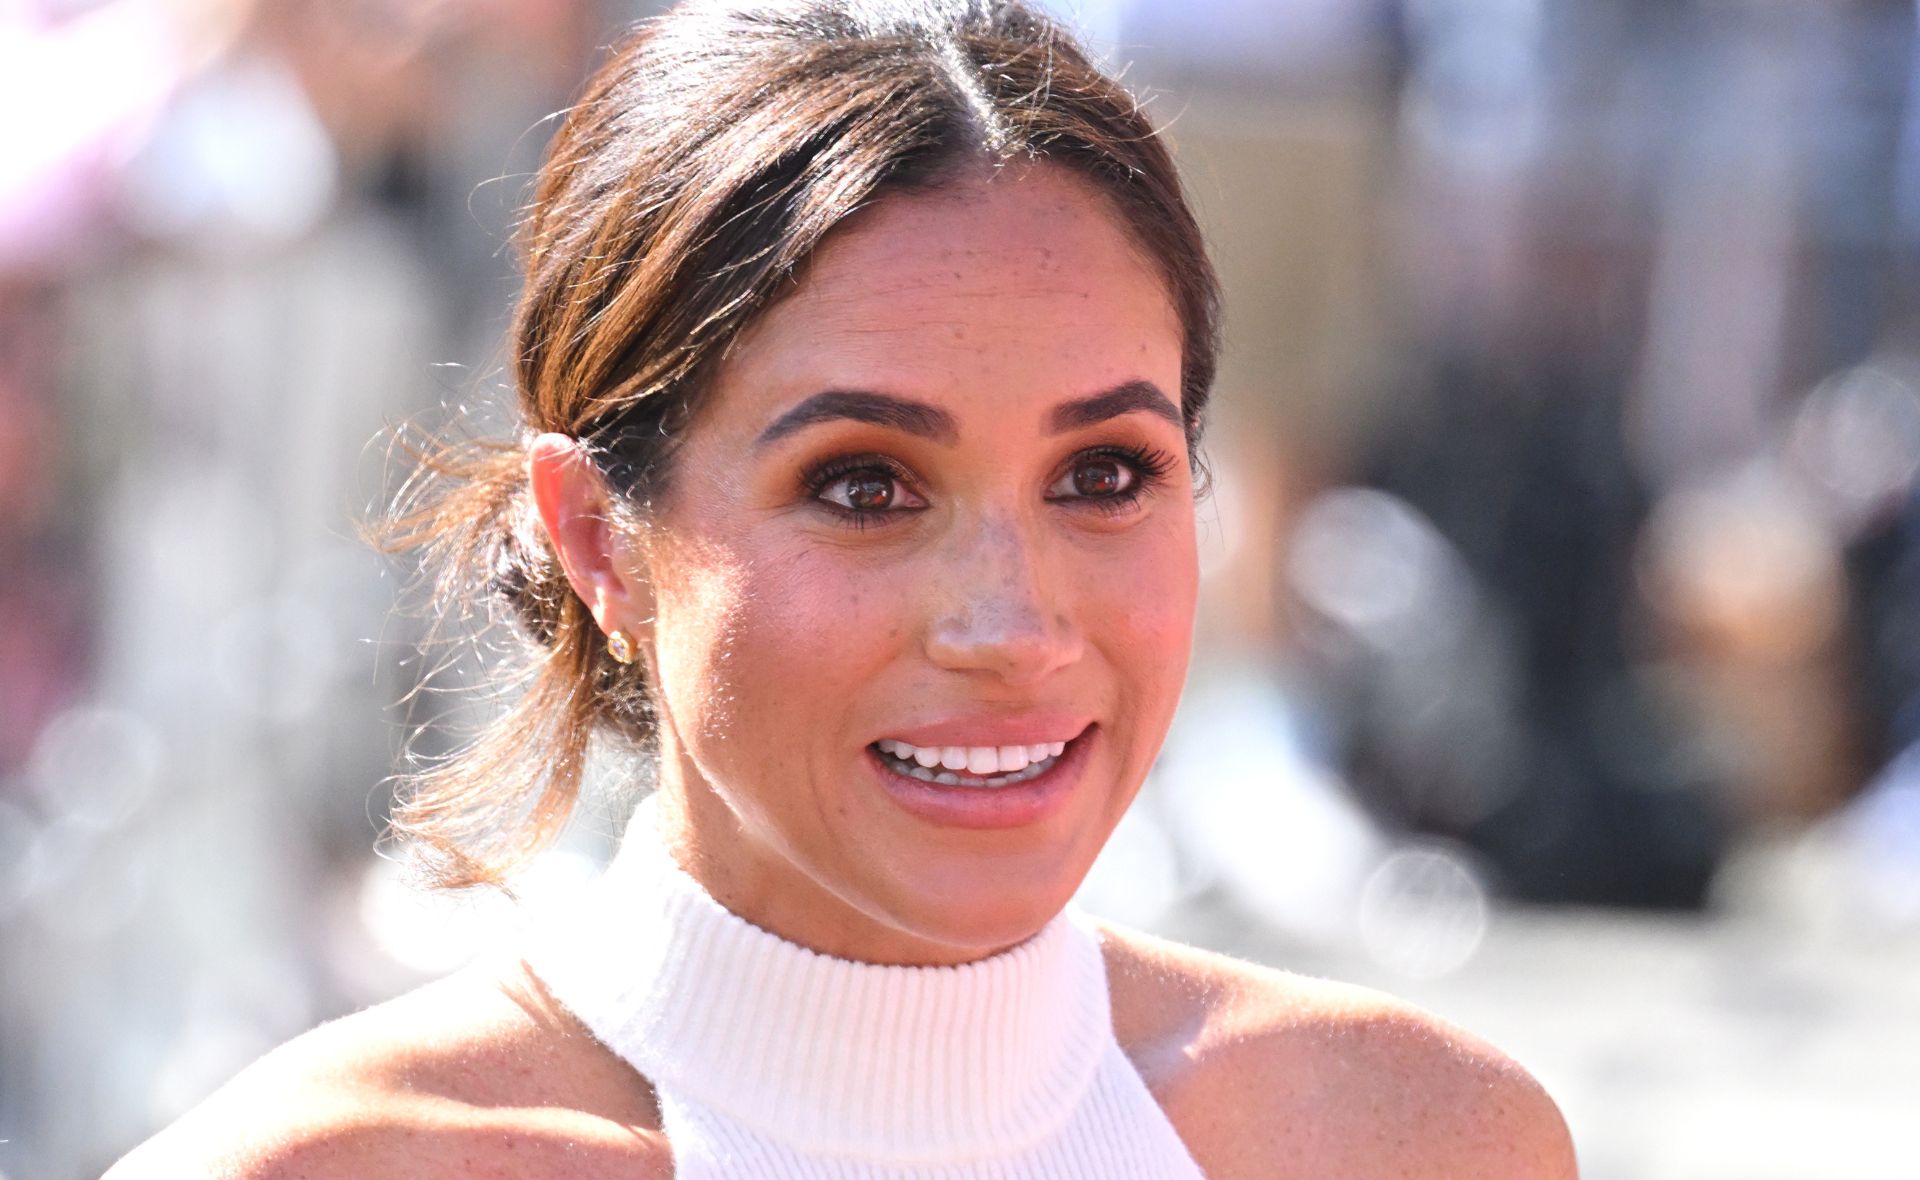 What is Meghan Markle’s real name? Here is what we know…